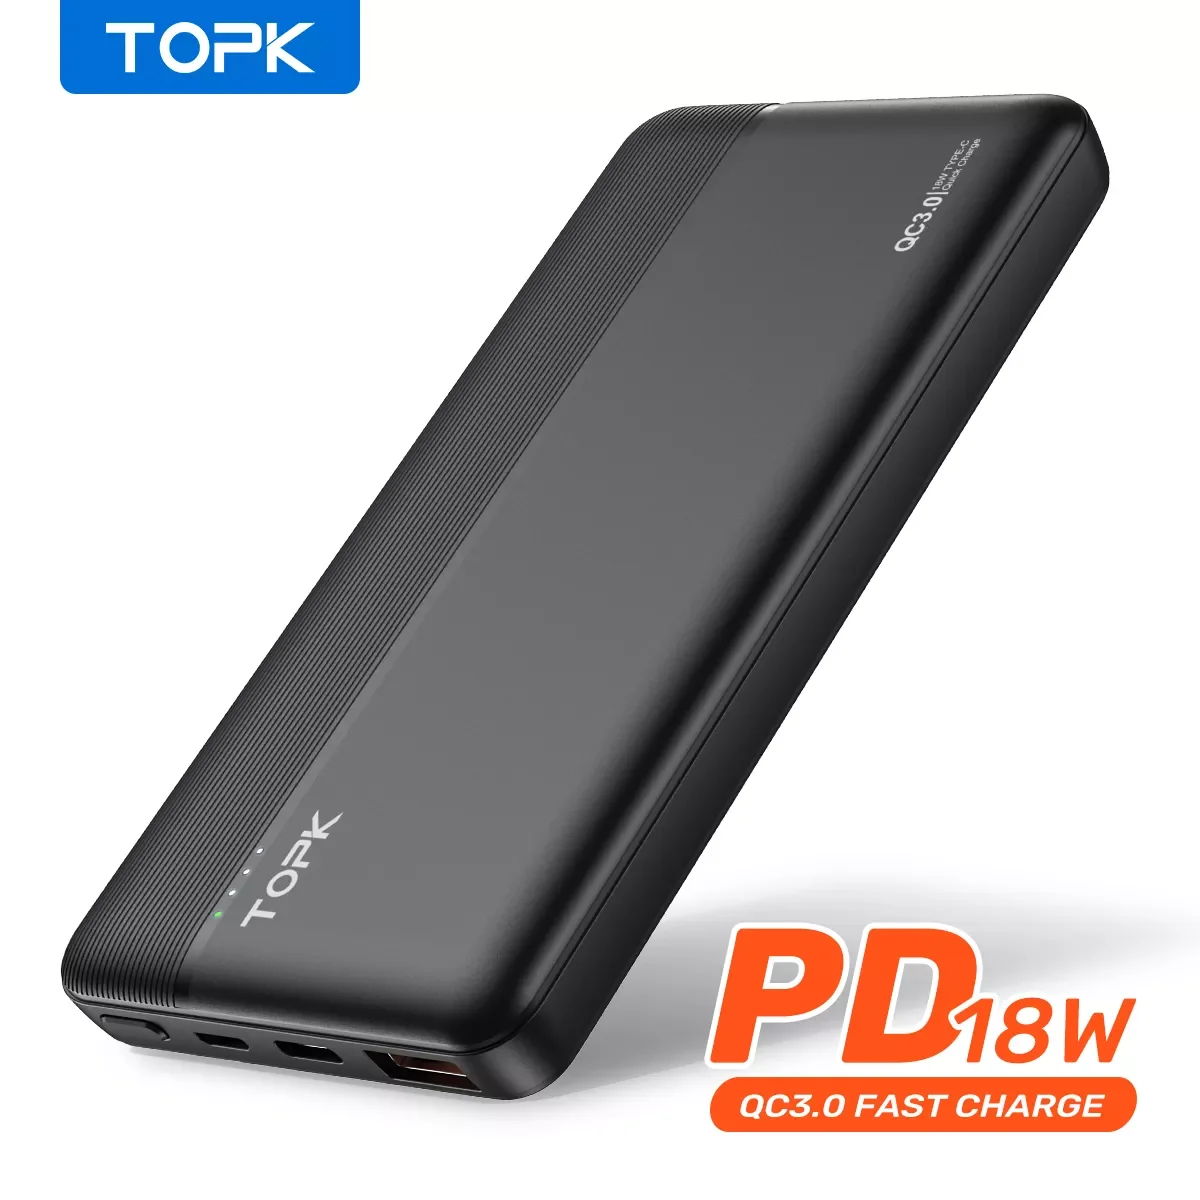 

TOPK I1015P Quick Charge 3.0 10000mAh Power Bank USB Type C PD PowerBank Portable External Battery Charger for iPhone